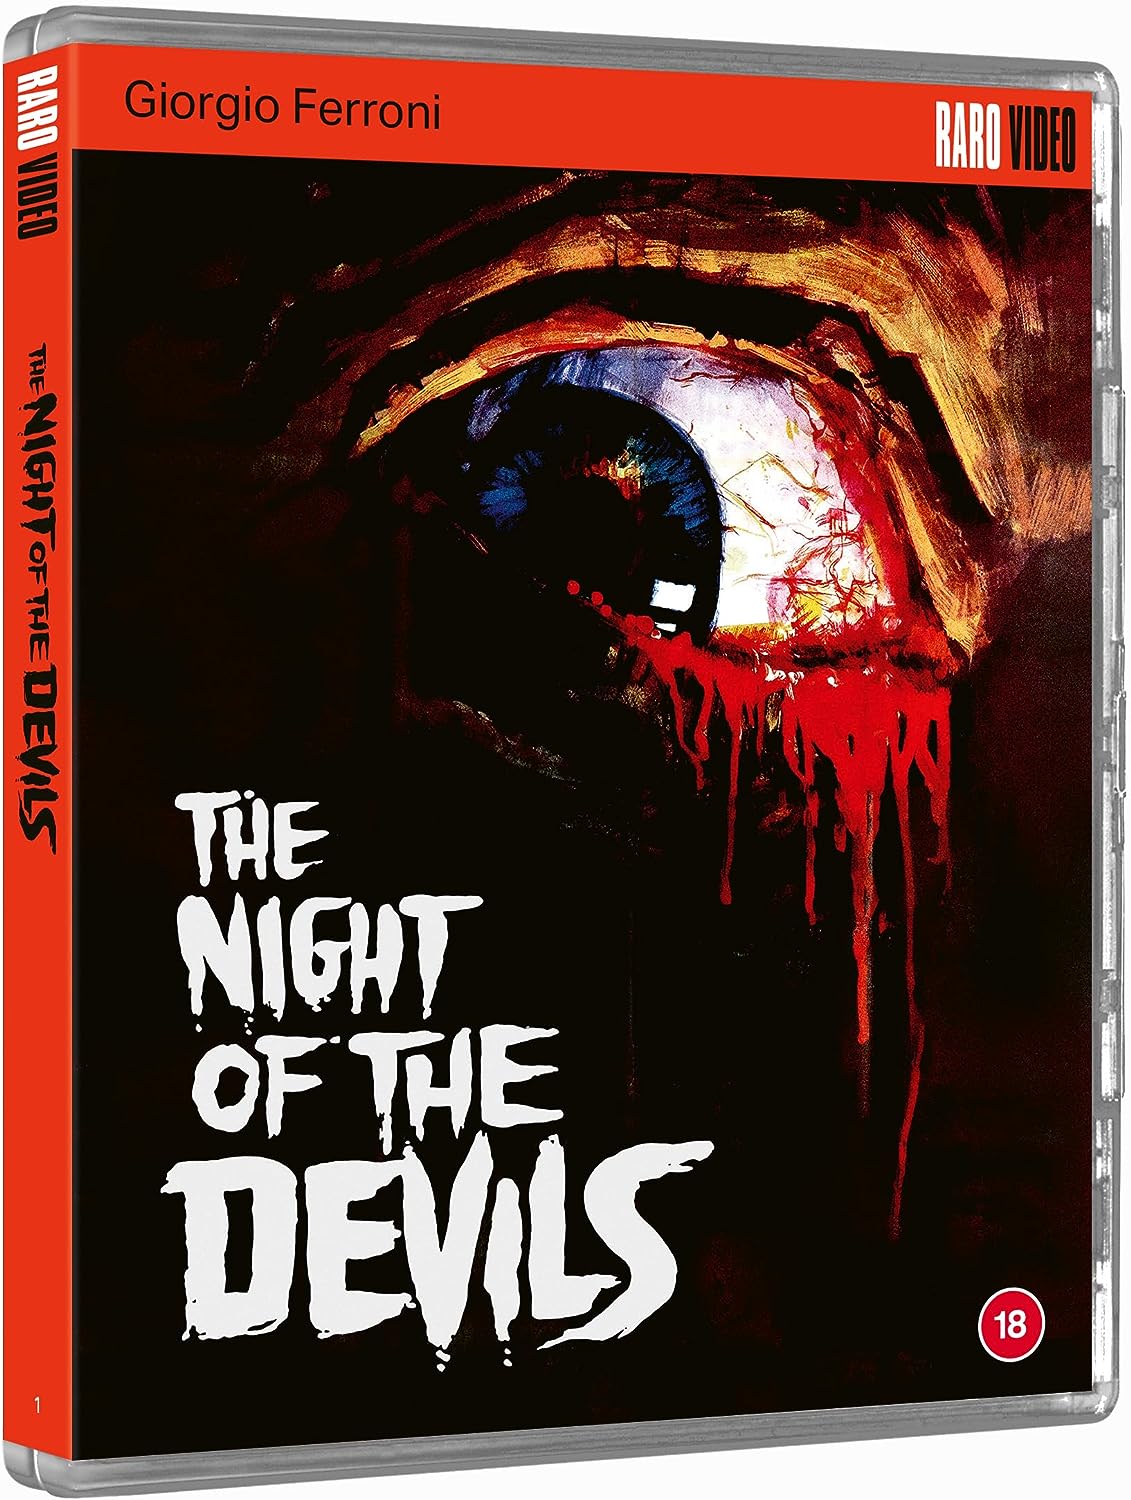 The Night of the Devils Limited Edition Raro Video Blu-Ray [NEW]